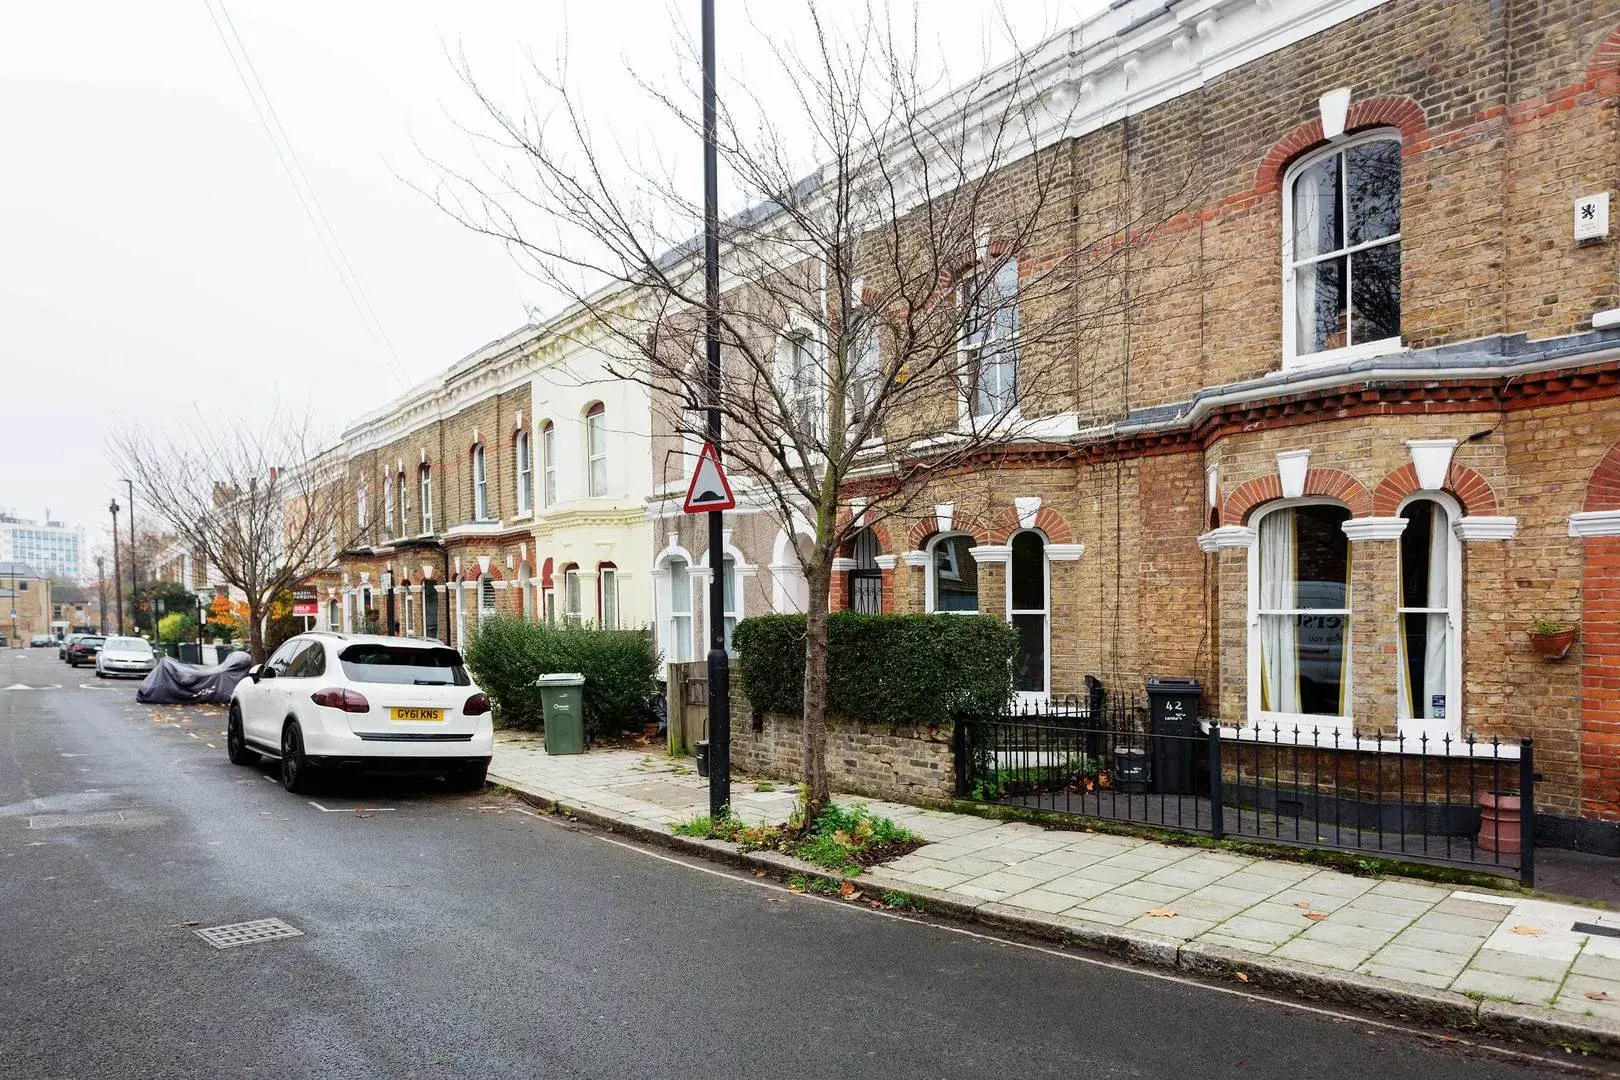 Pulross Road, holiday home in Clapham, London